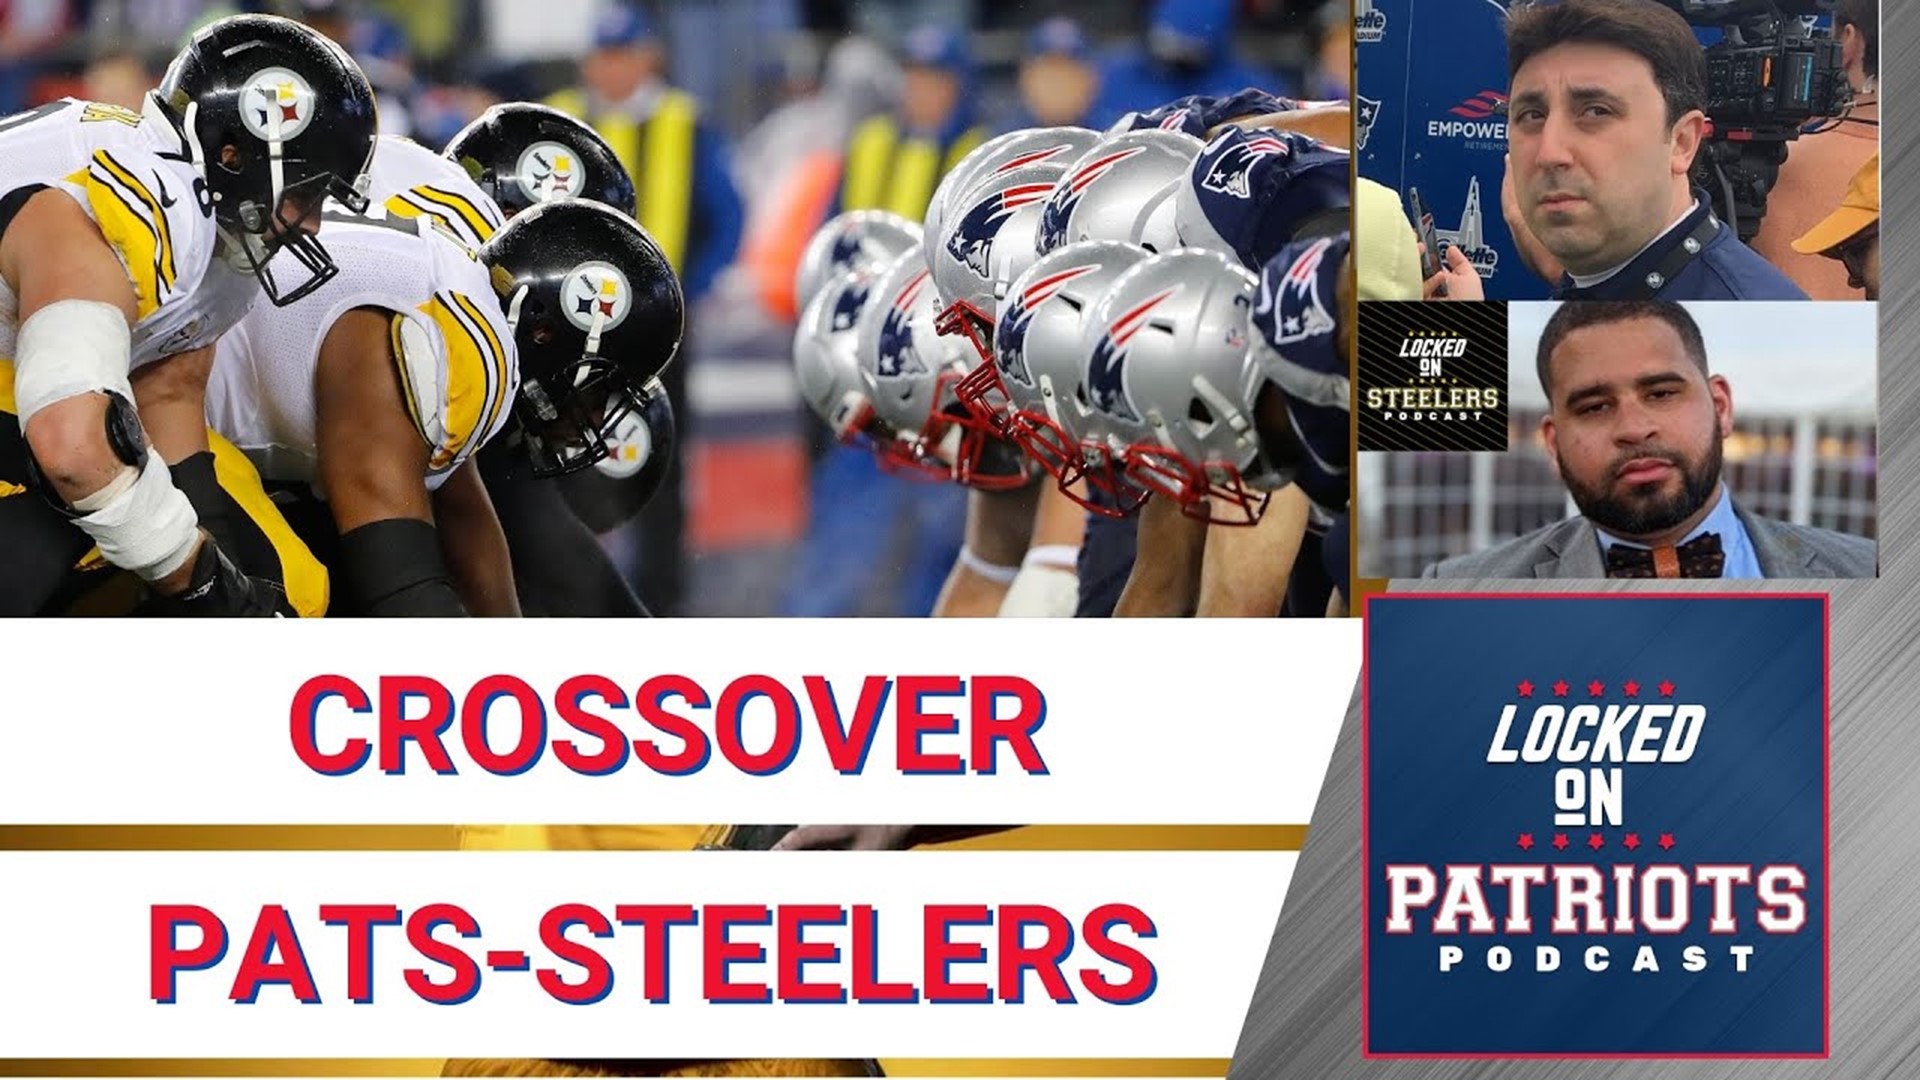 Mike D’Abate of Locked On Patriots and Christopher Carter of Locked On Steelers preview the matchup between the New England Patriots and the Pittsburgh Steelers.